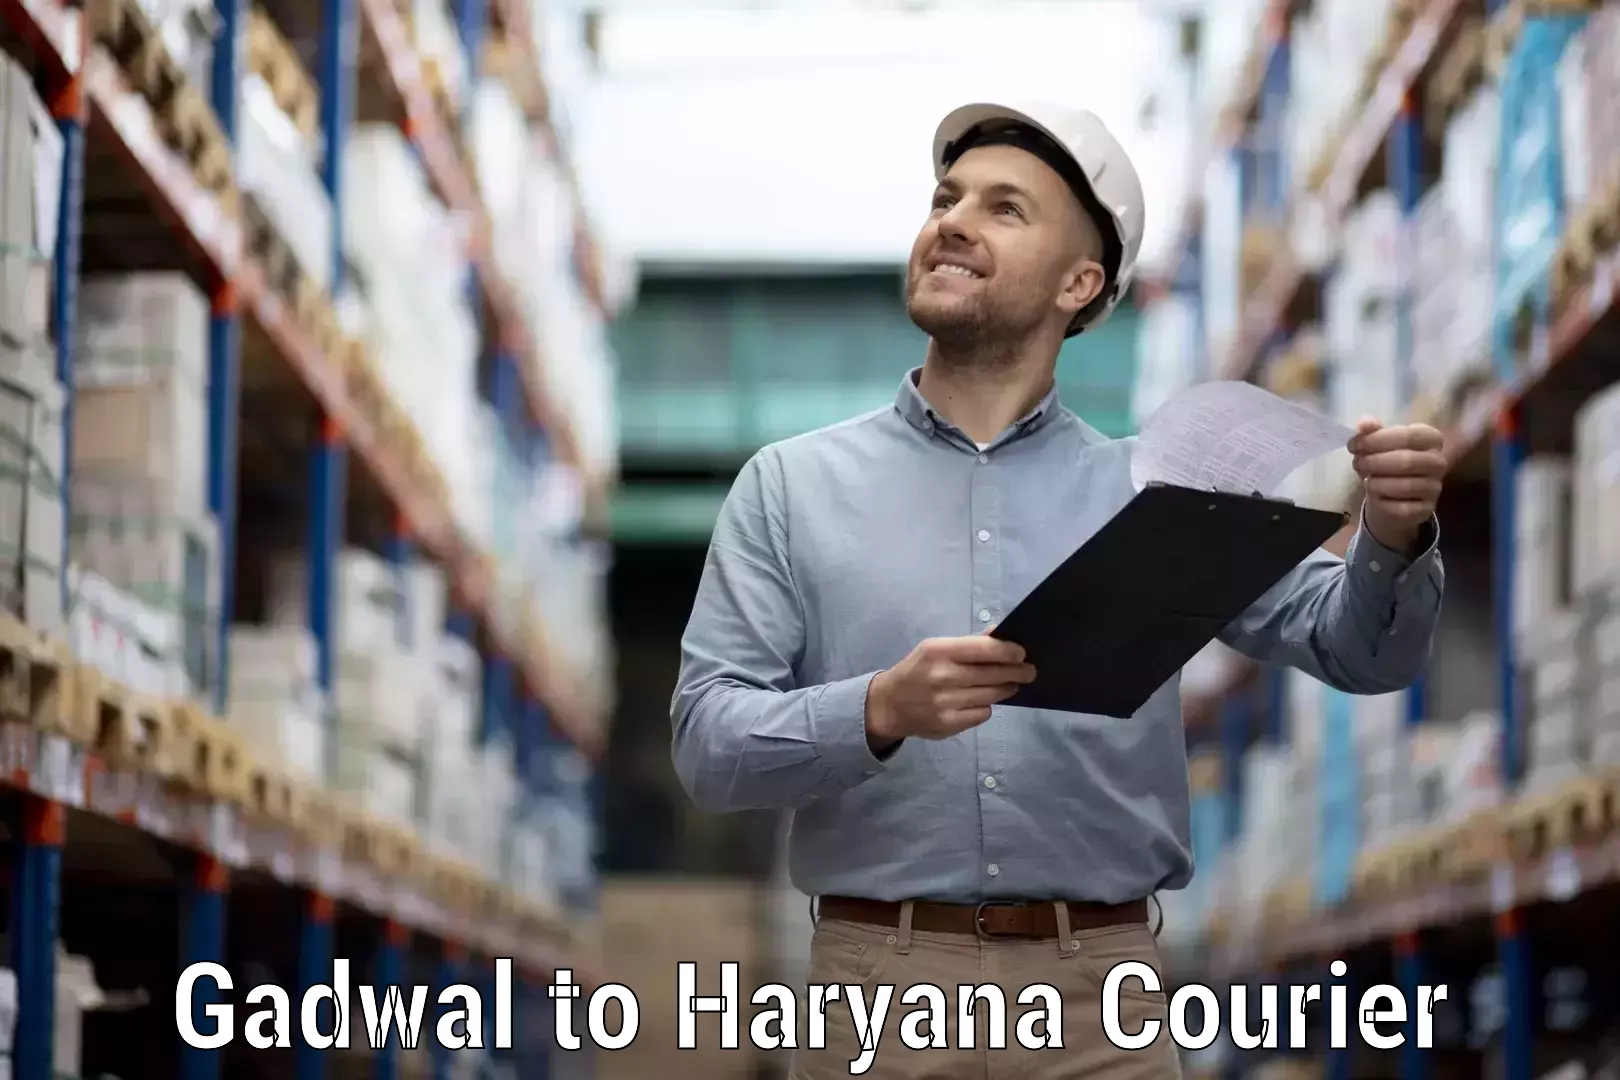 Small business couriers Gadwal to Chaudhary Charan Singh Haryana Agricultural University Hisar